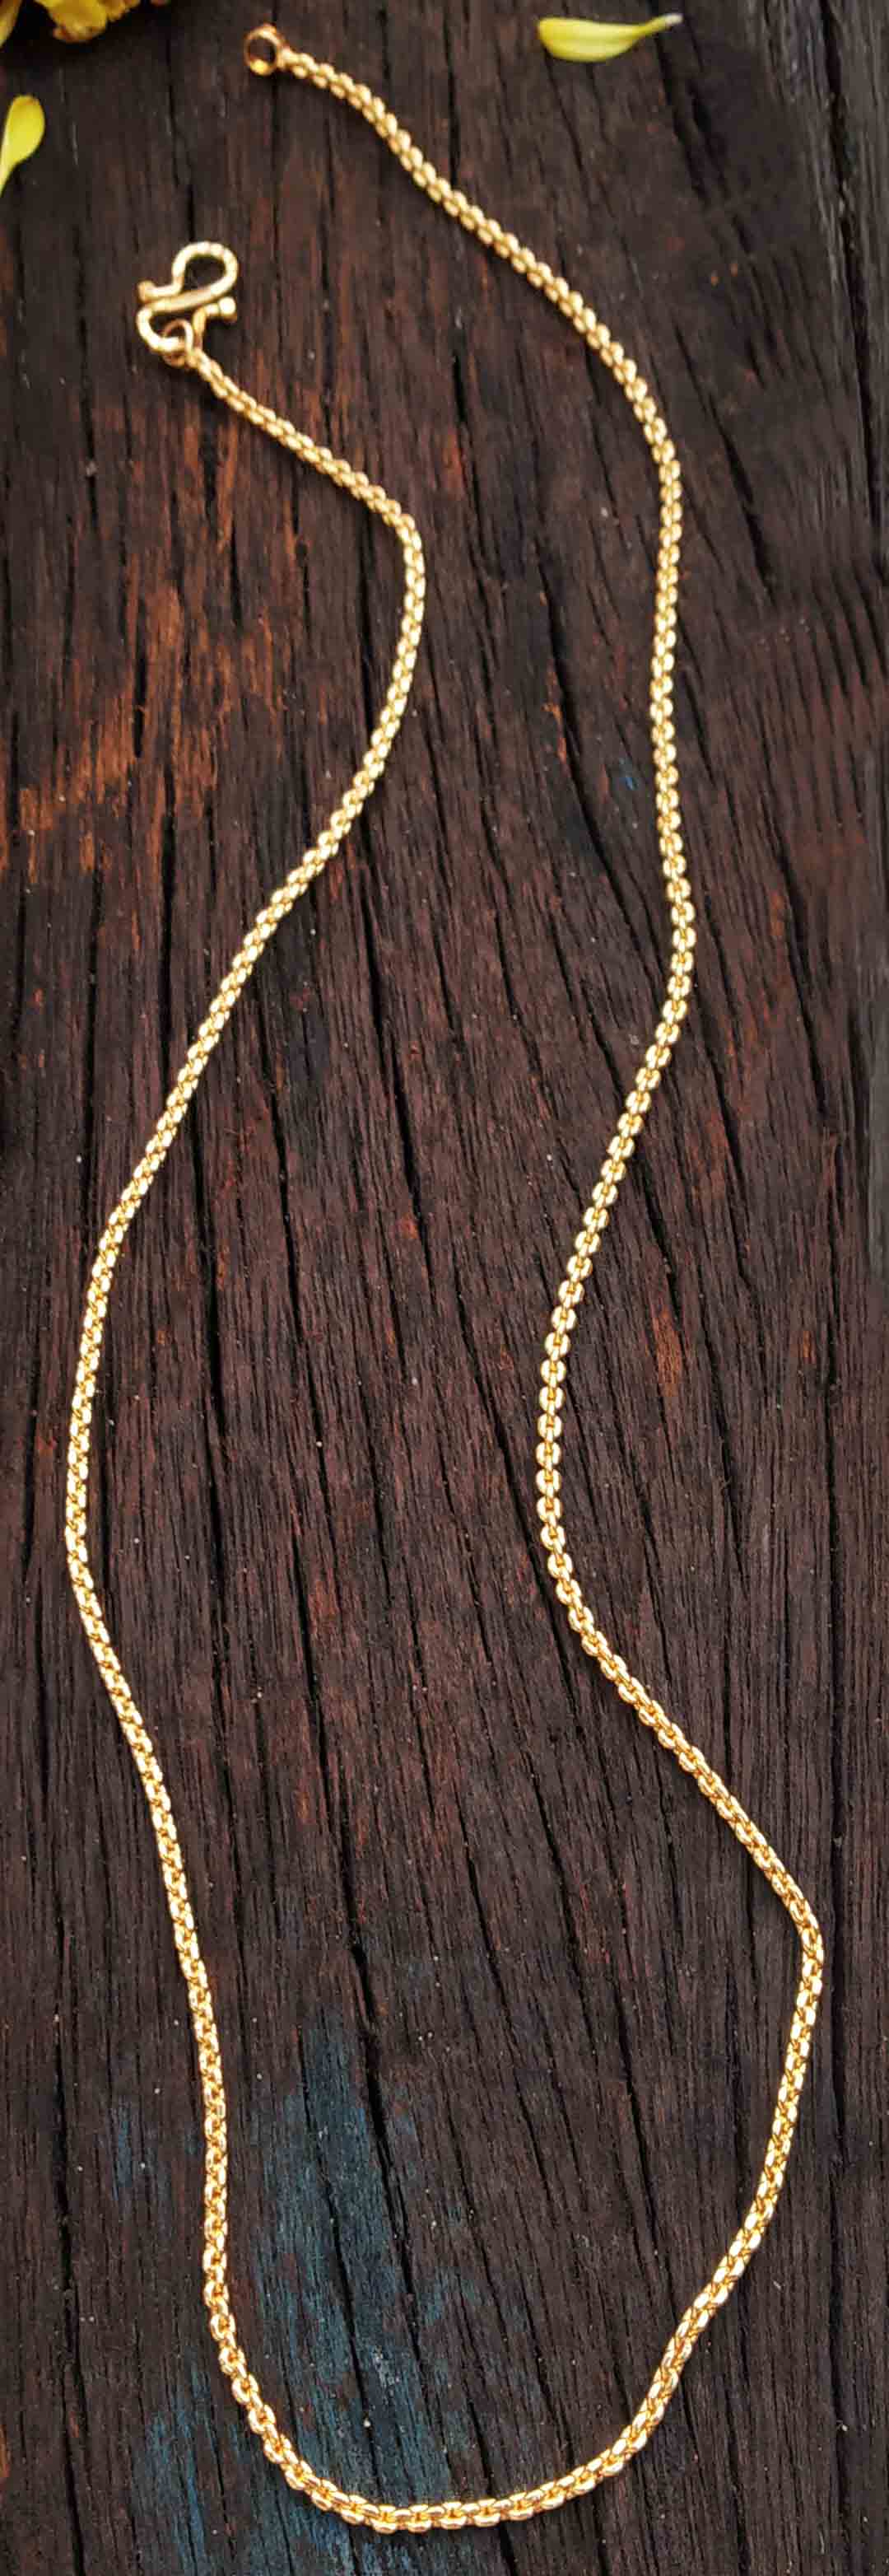 gold plated imitation chain at lowest price